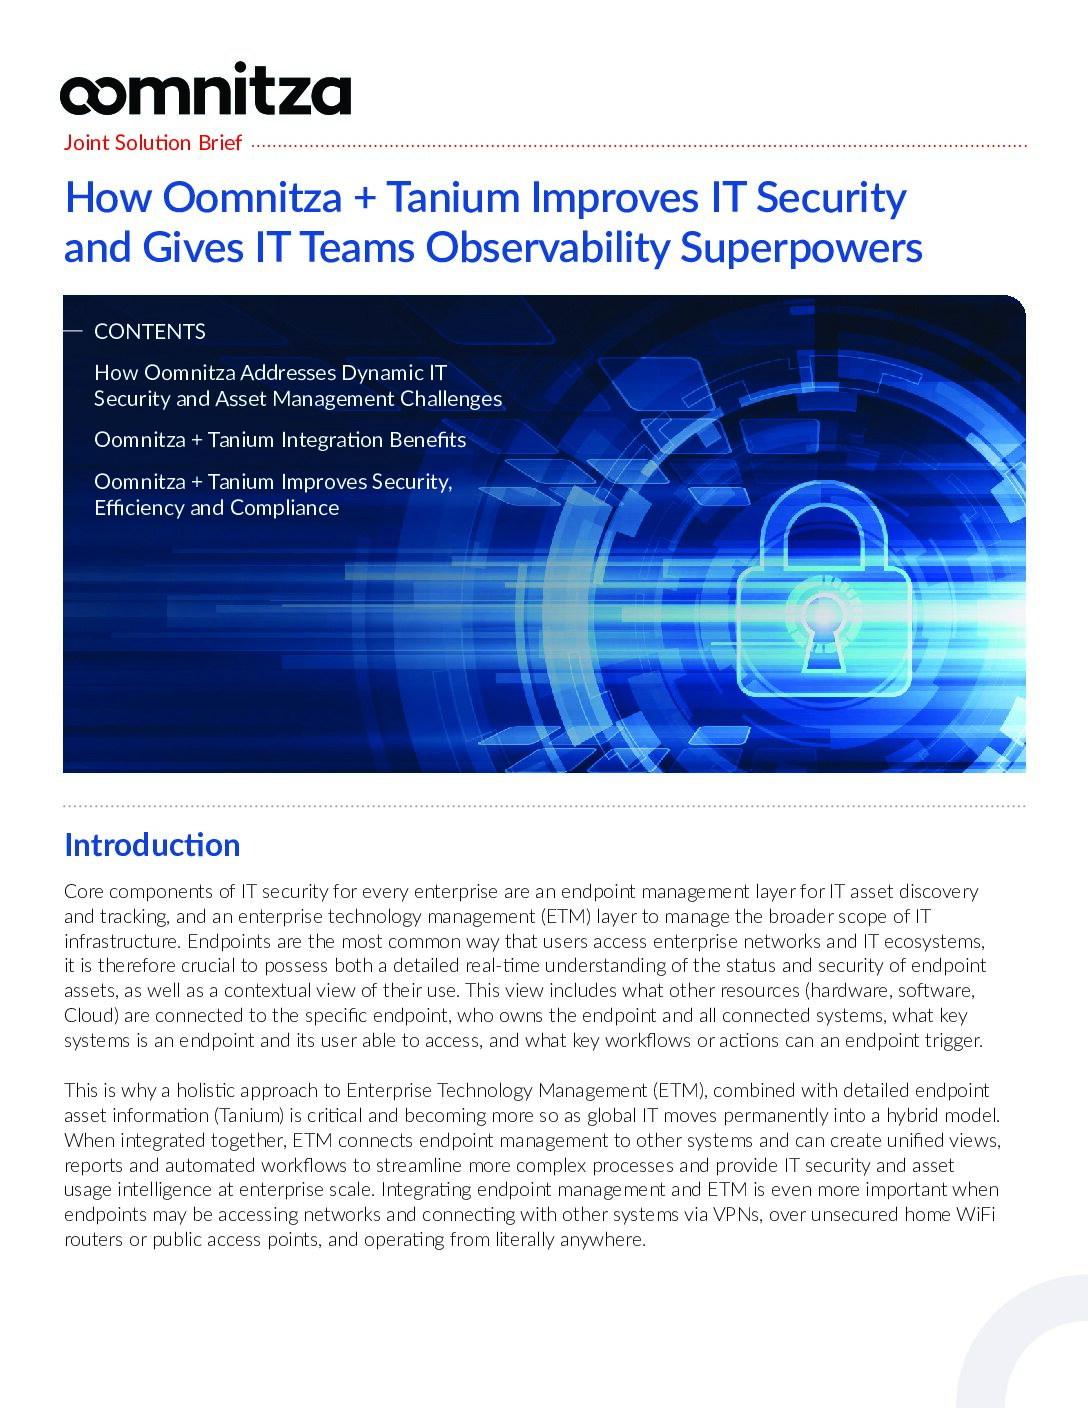 Featured image for How Oomnitza + Tanium Improves IT Security and Gives IT Teams Observability Superpowers